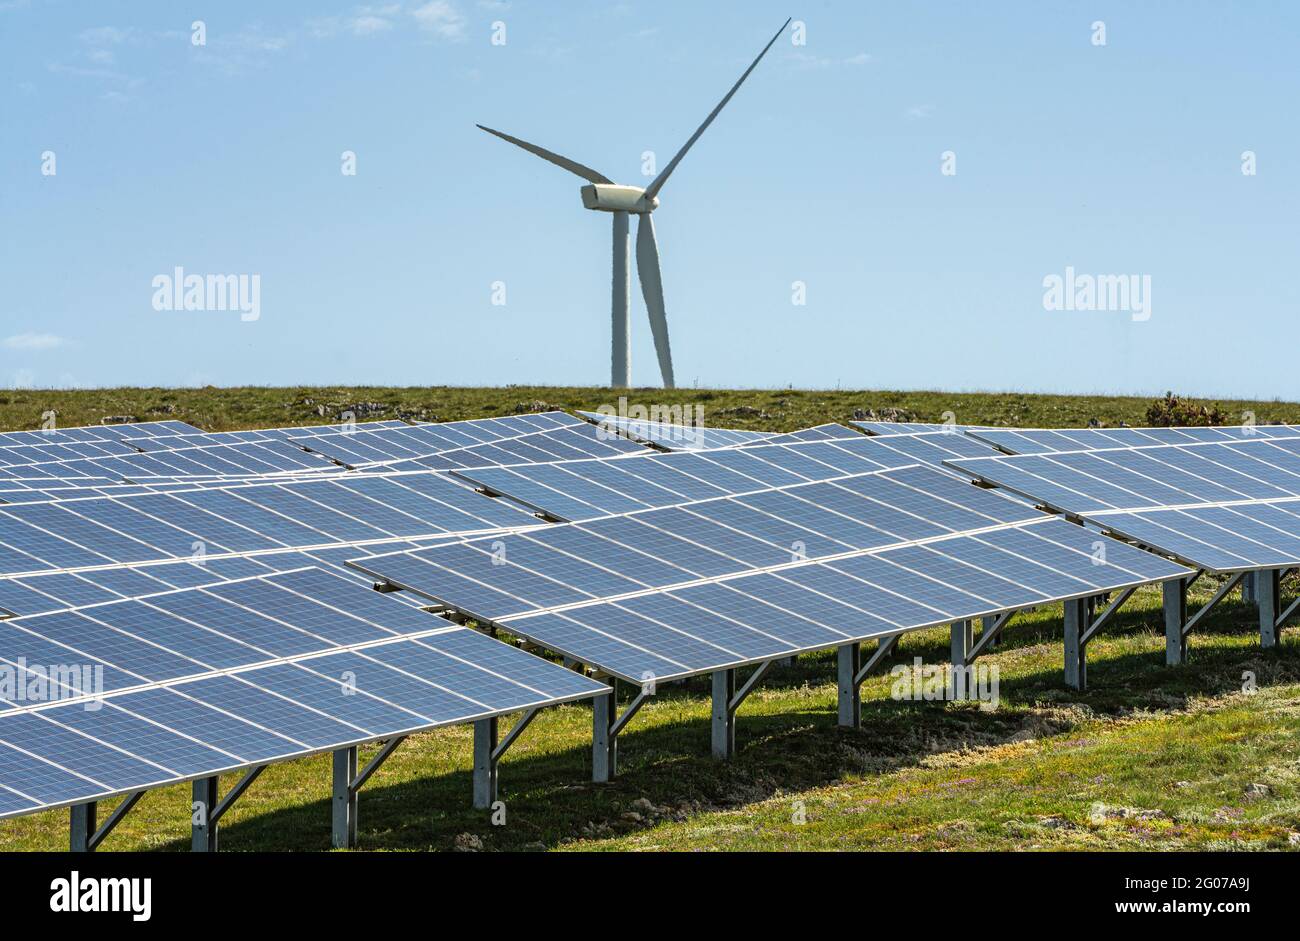 Solar panels and wind turbines for the production of renewable and low-polluting energy. Collarmele, province of L'Aquila, Abruzzo, Italy, Europe Stock Photo